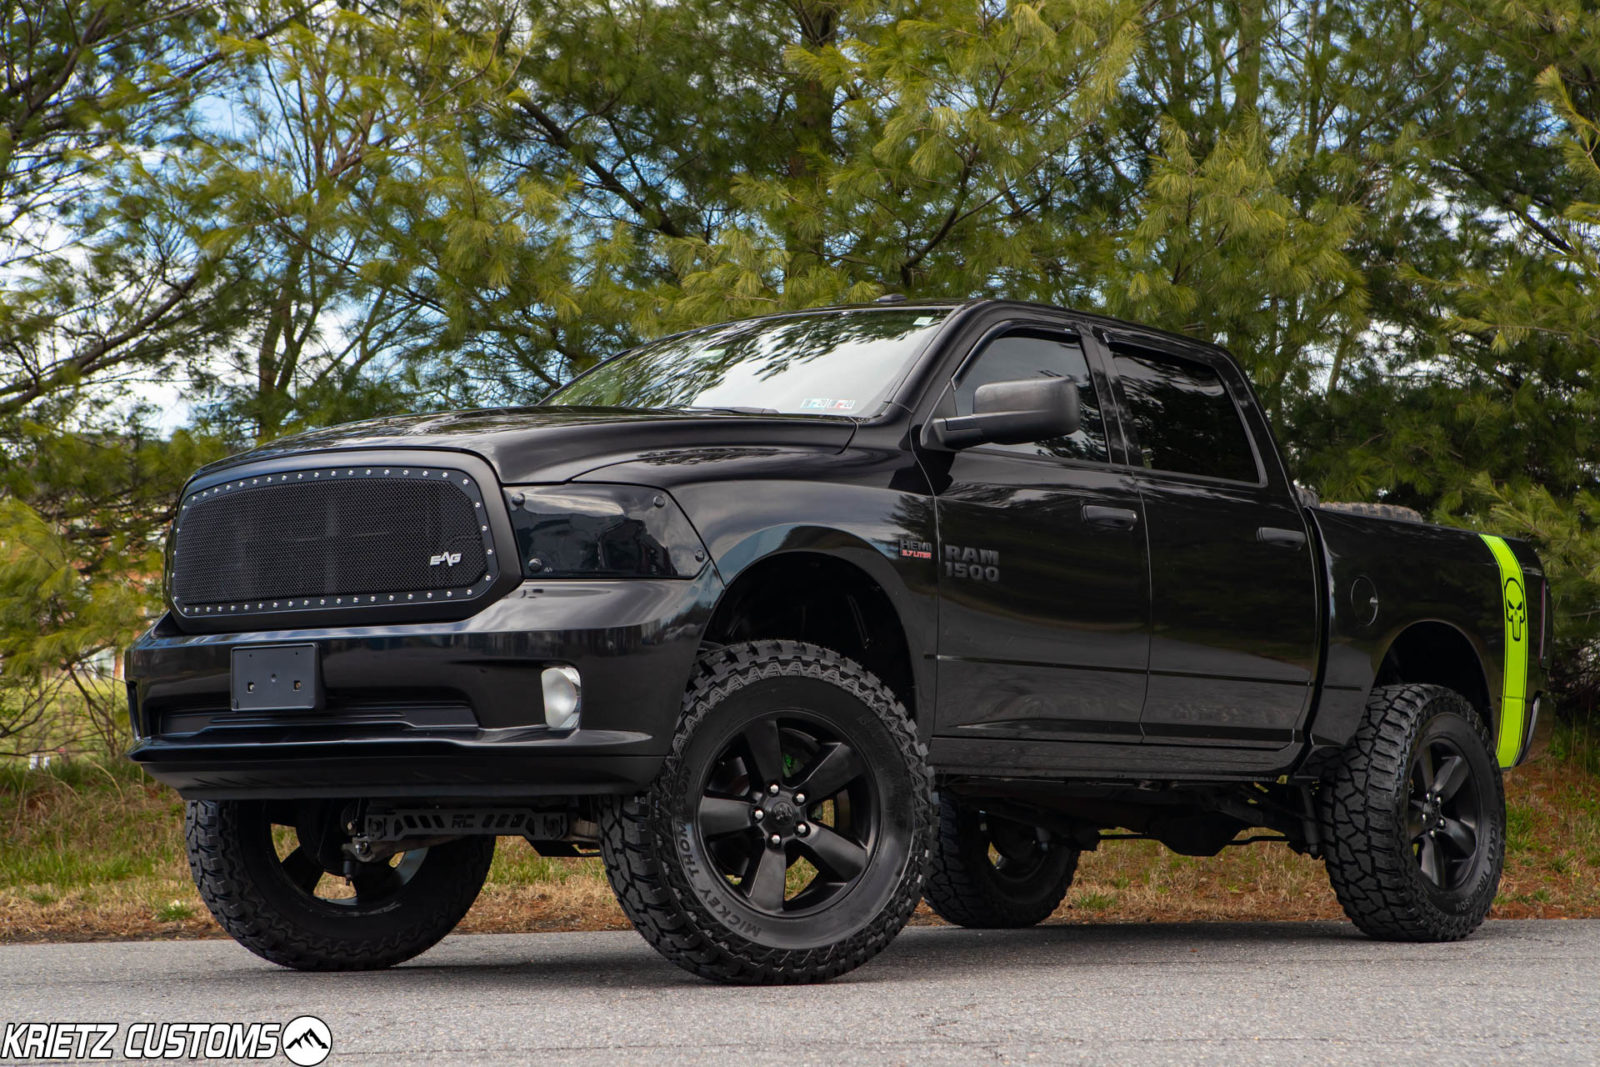 Lifted 2015 Ram 1500 With 6 Inch Rough Country Lift Kit Krietz Auto